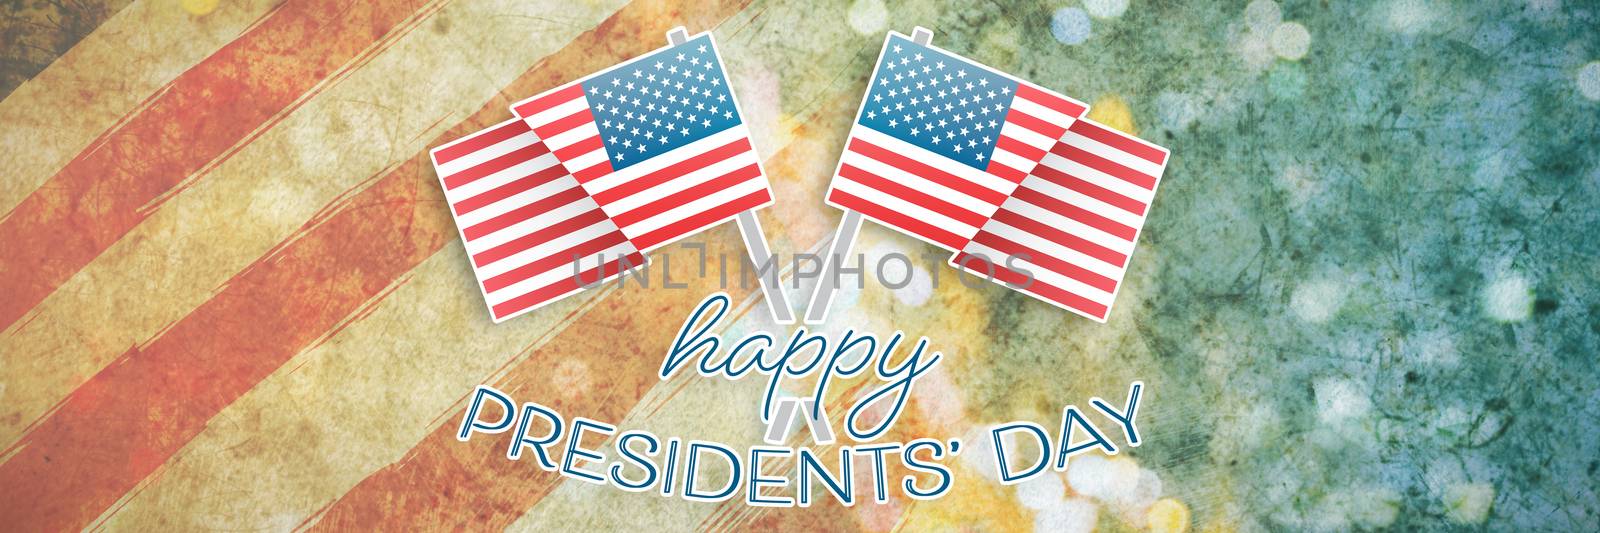 Composite image of happy presidents day vector typography and two american flags by Wavebreakmedia